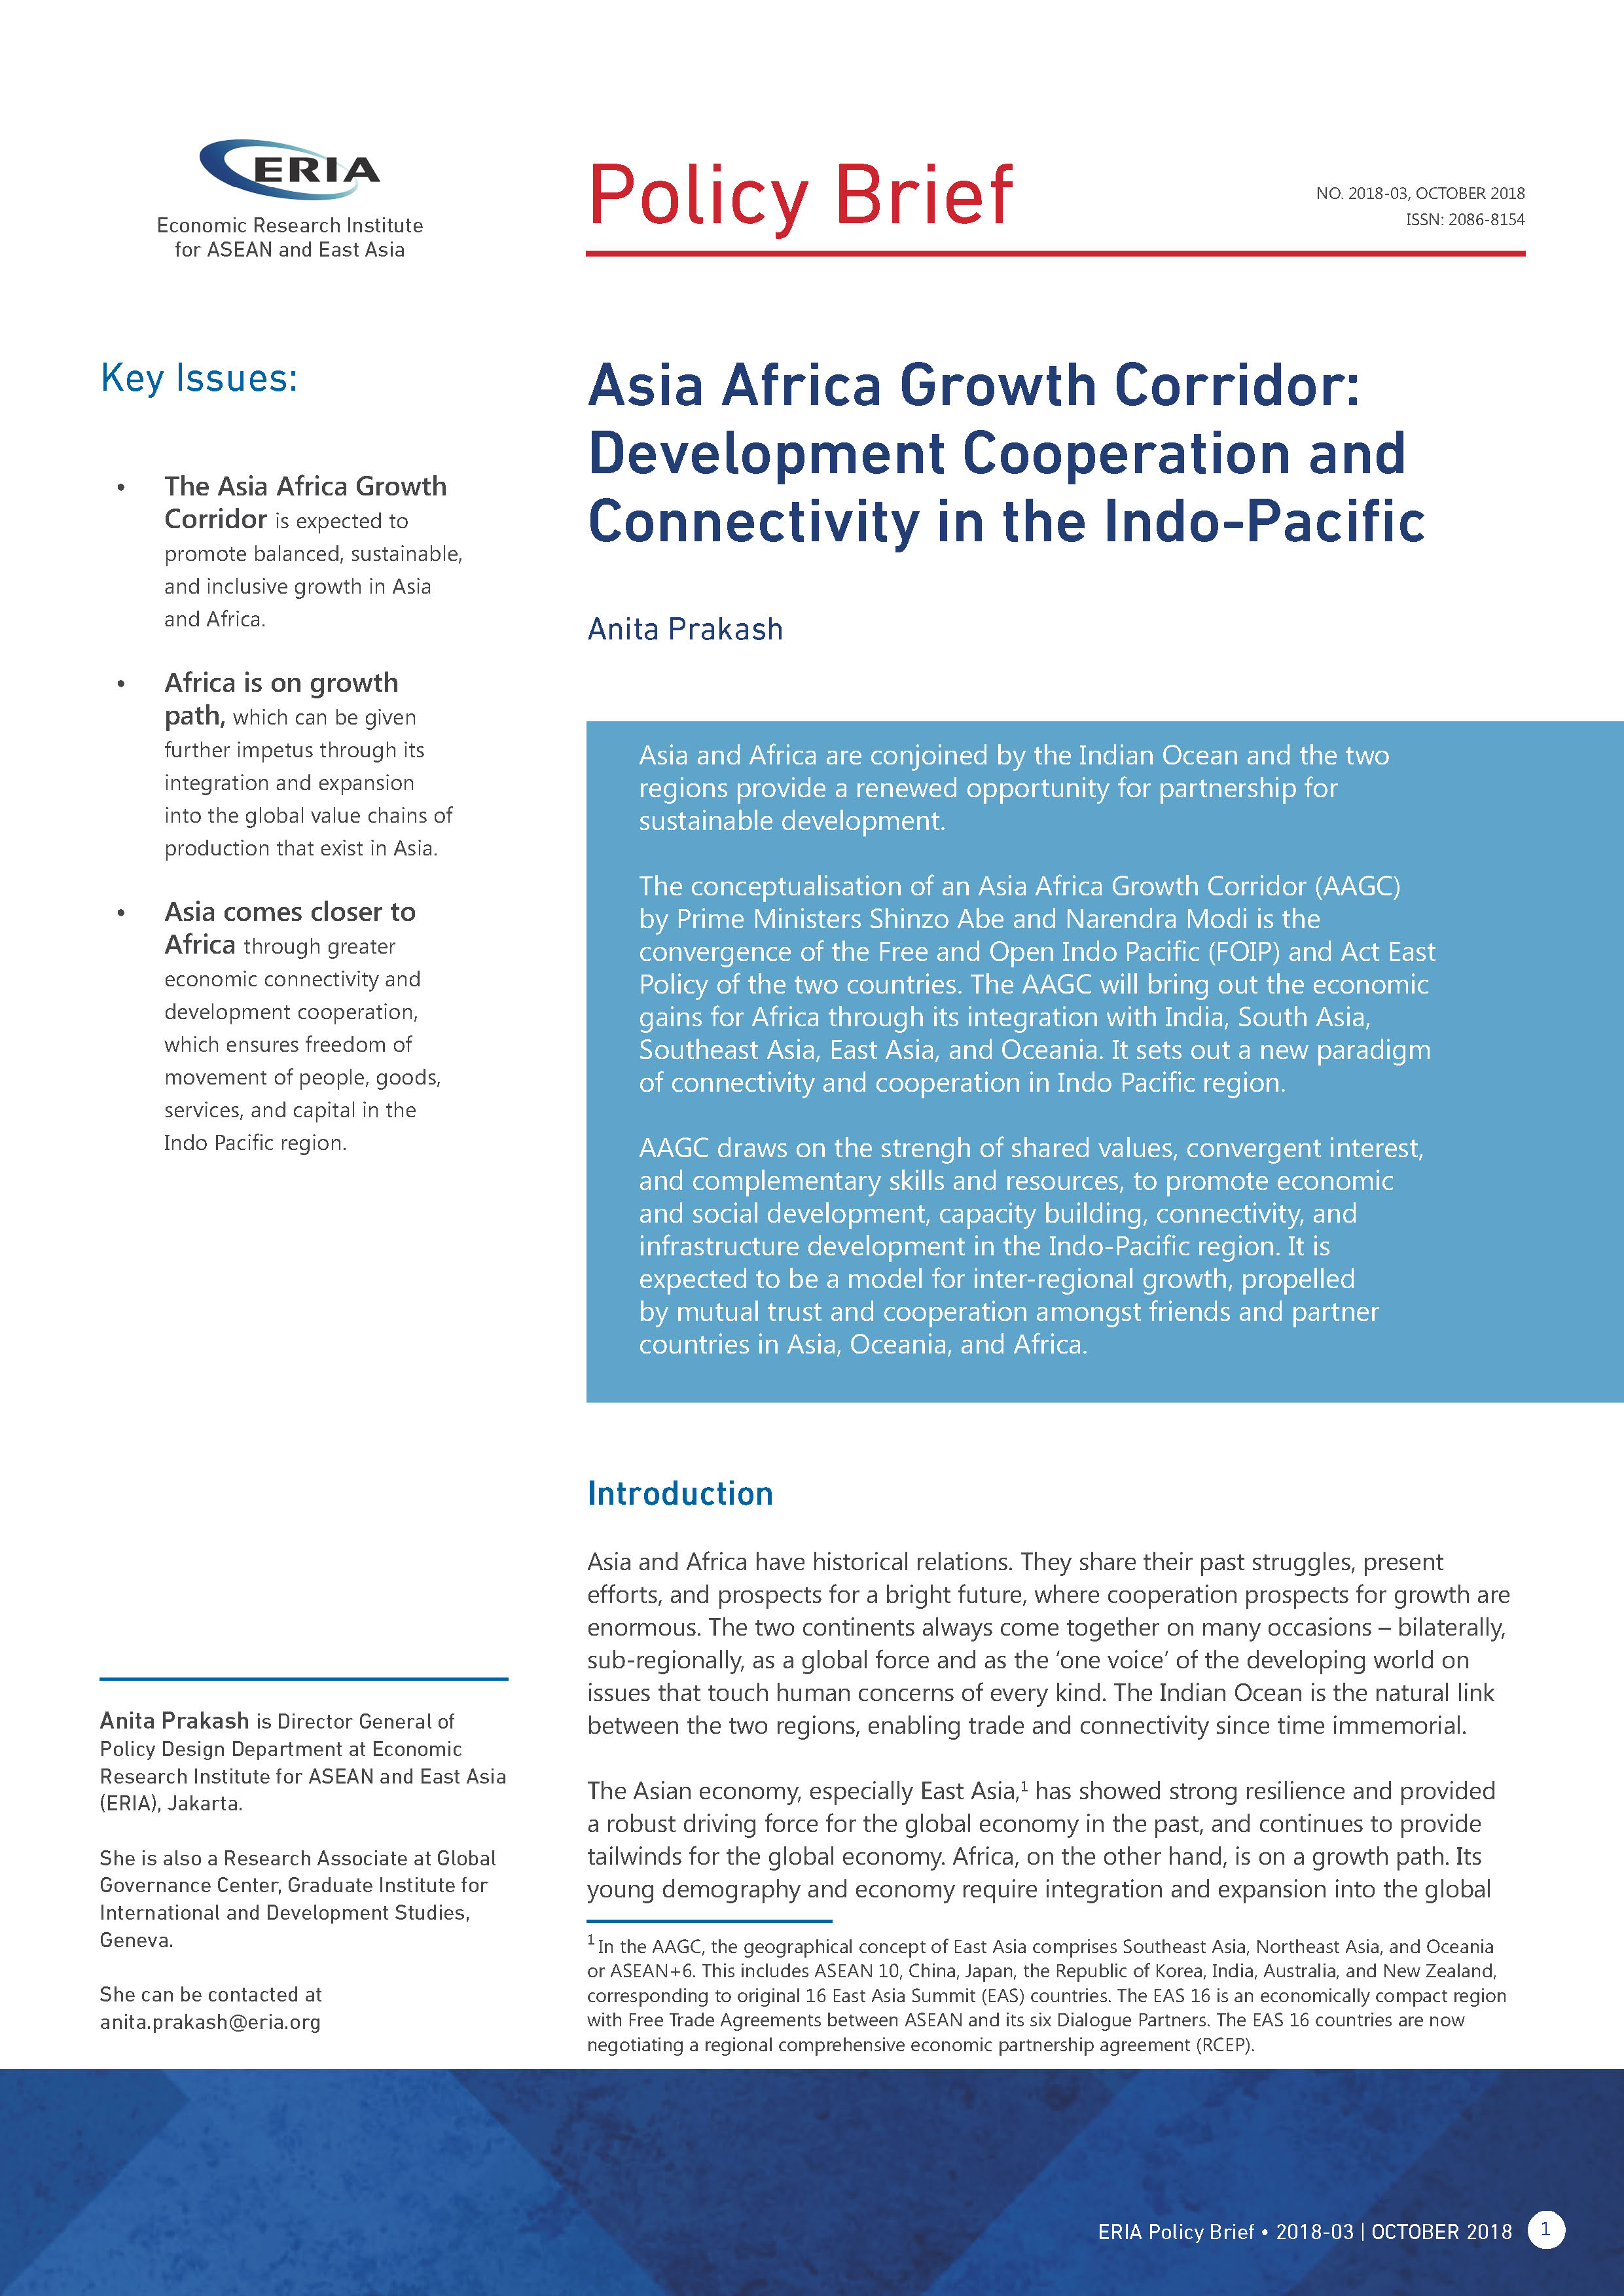 Asia Africa Growth Corridor: Development Cooperation and Connectivity in the Indo-Pacific